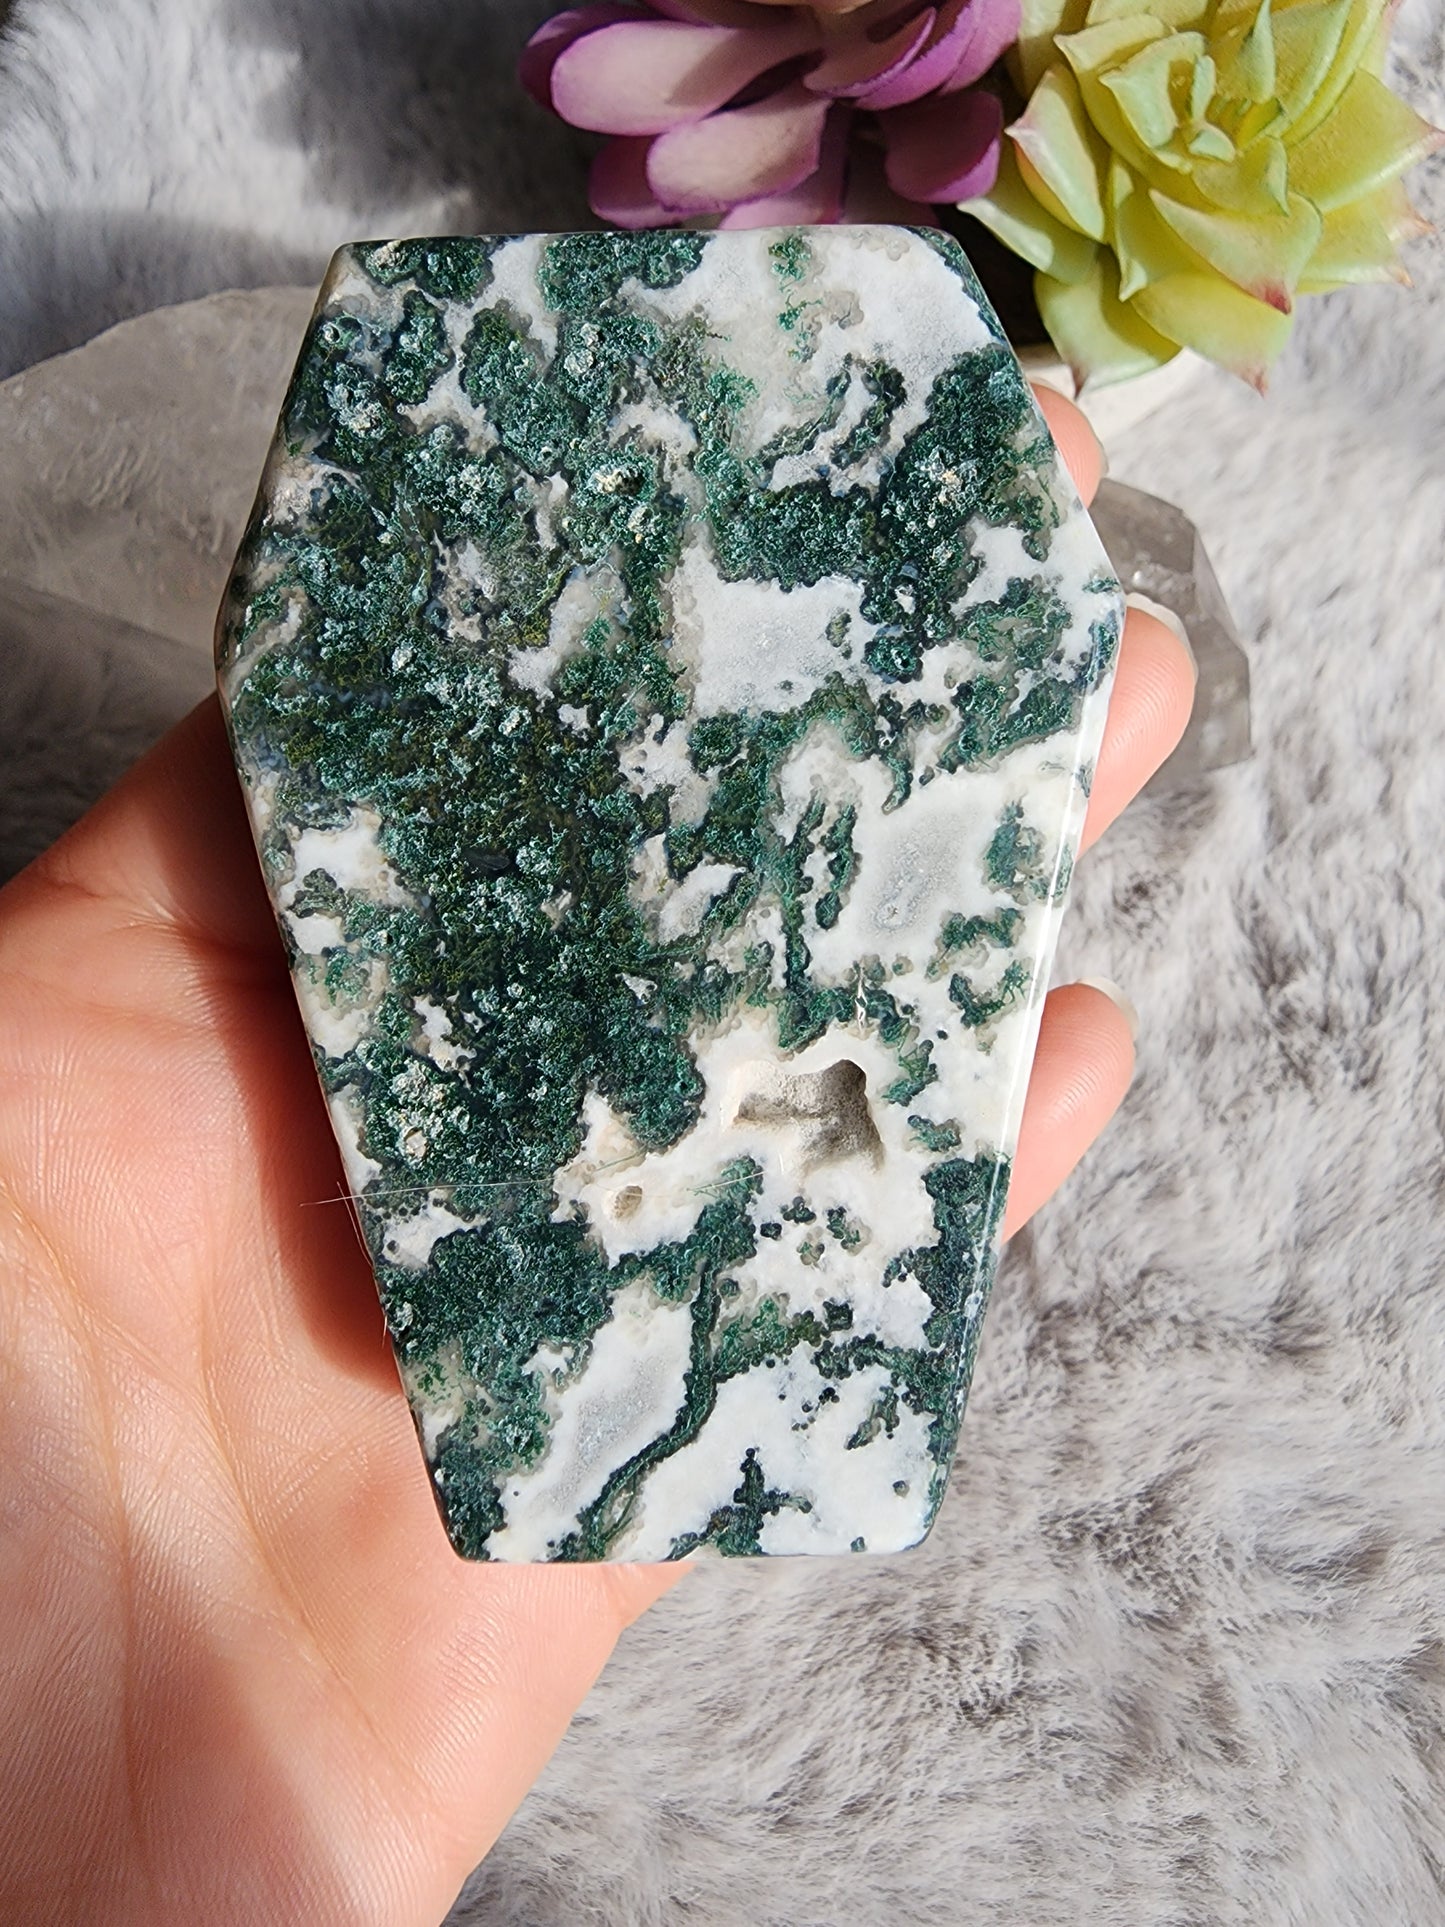 Tree Agate Coffin